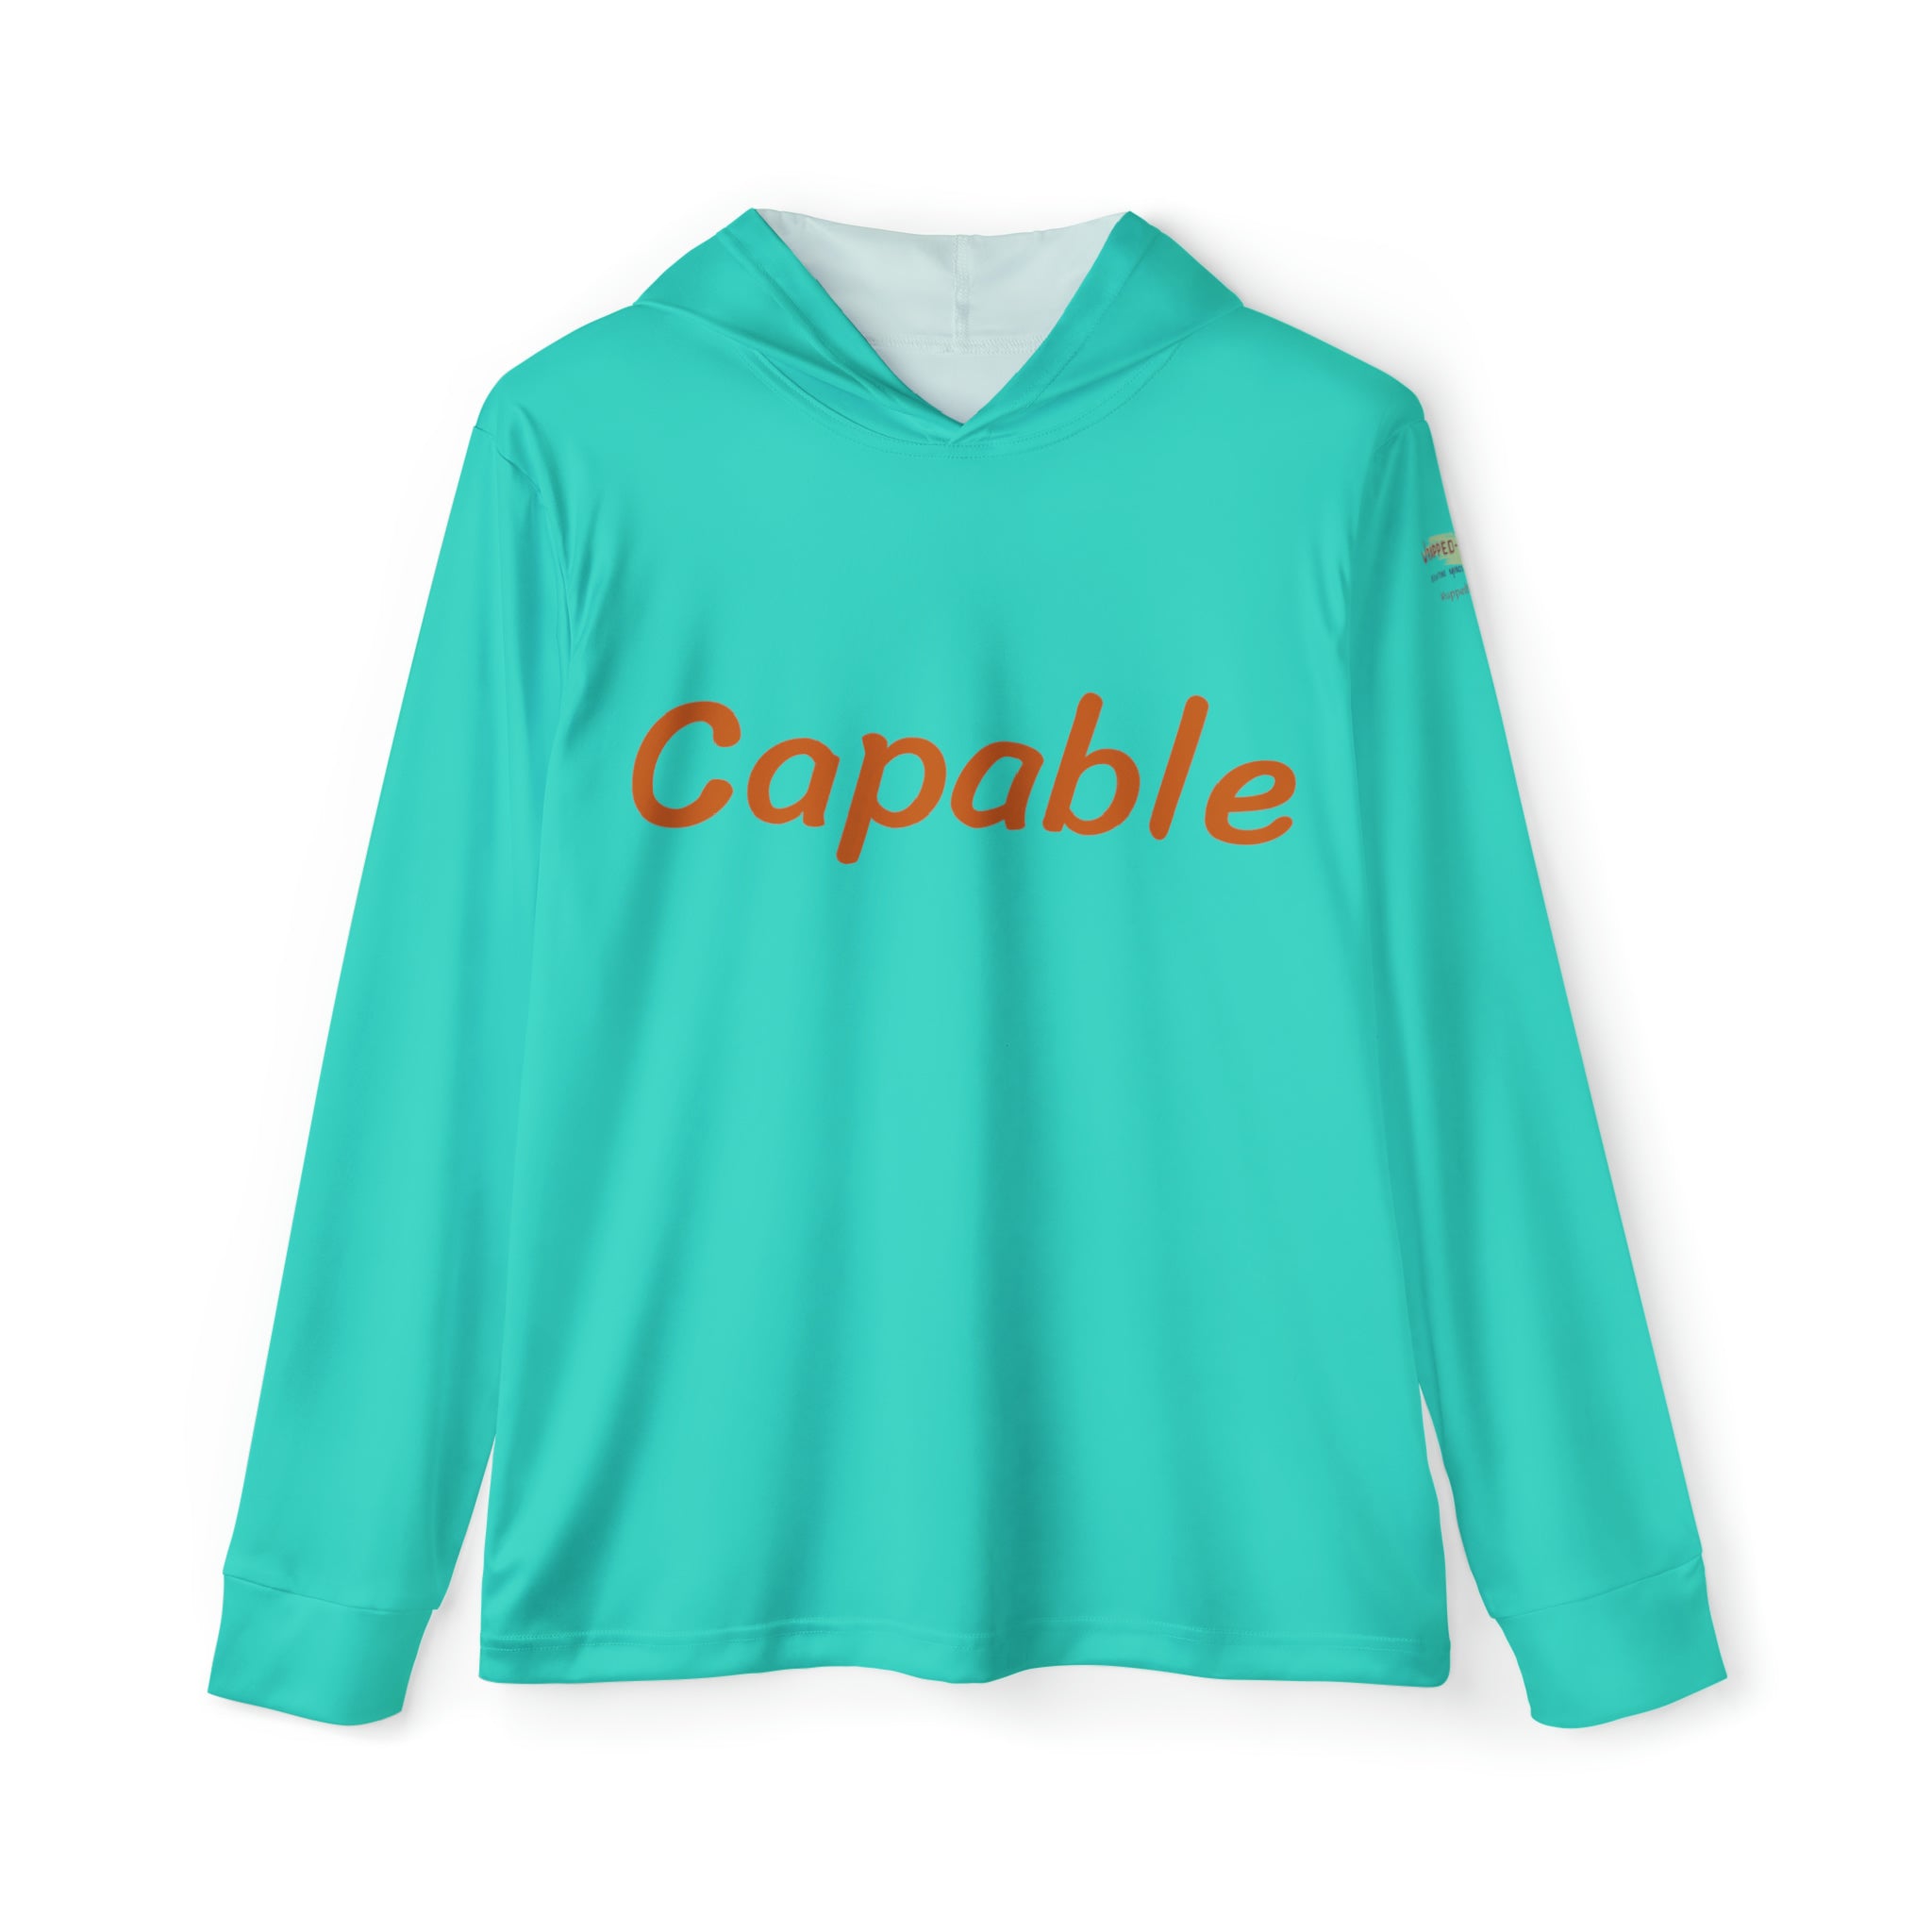 Capable Men's Warmup Hoodie: Elevate Performance Activewear Durable Fabric Made in USA Men's Hoodie Mental Health Support Moisture-wicking Performance Apparel Quality Control Sports Warmup UPF 50+ All Over Prints 2212244863988457185_2048 Printify